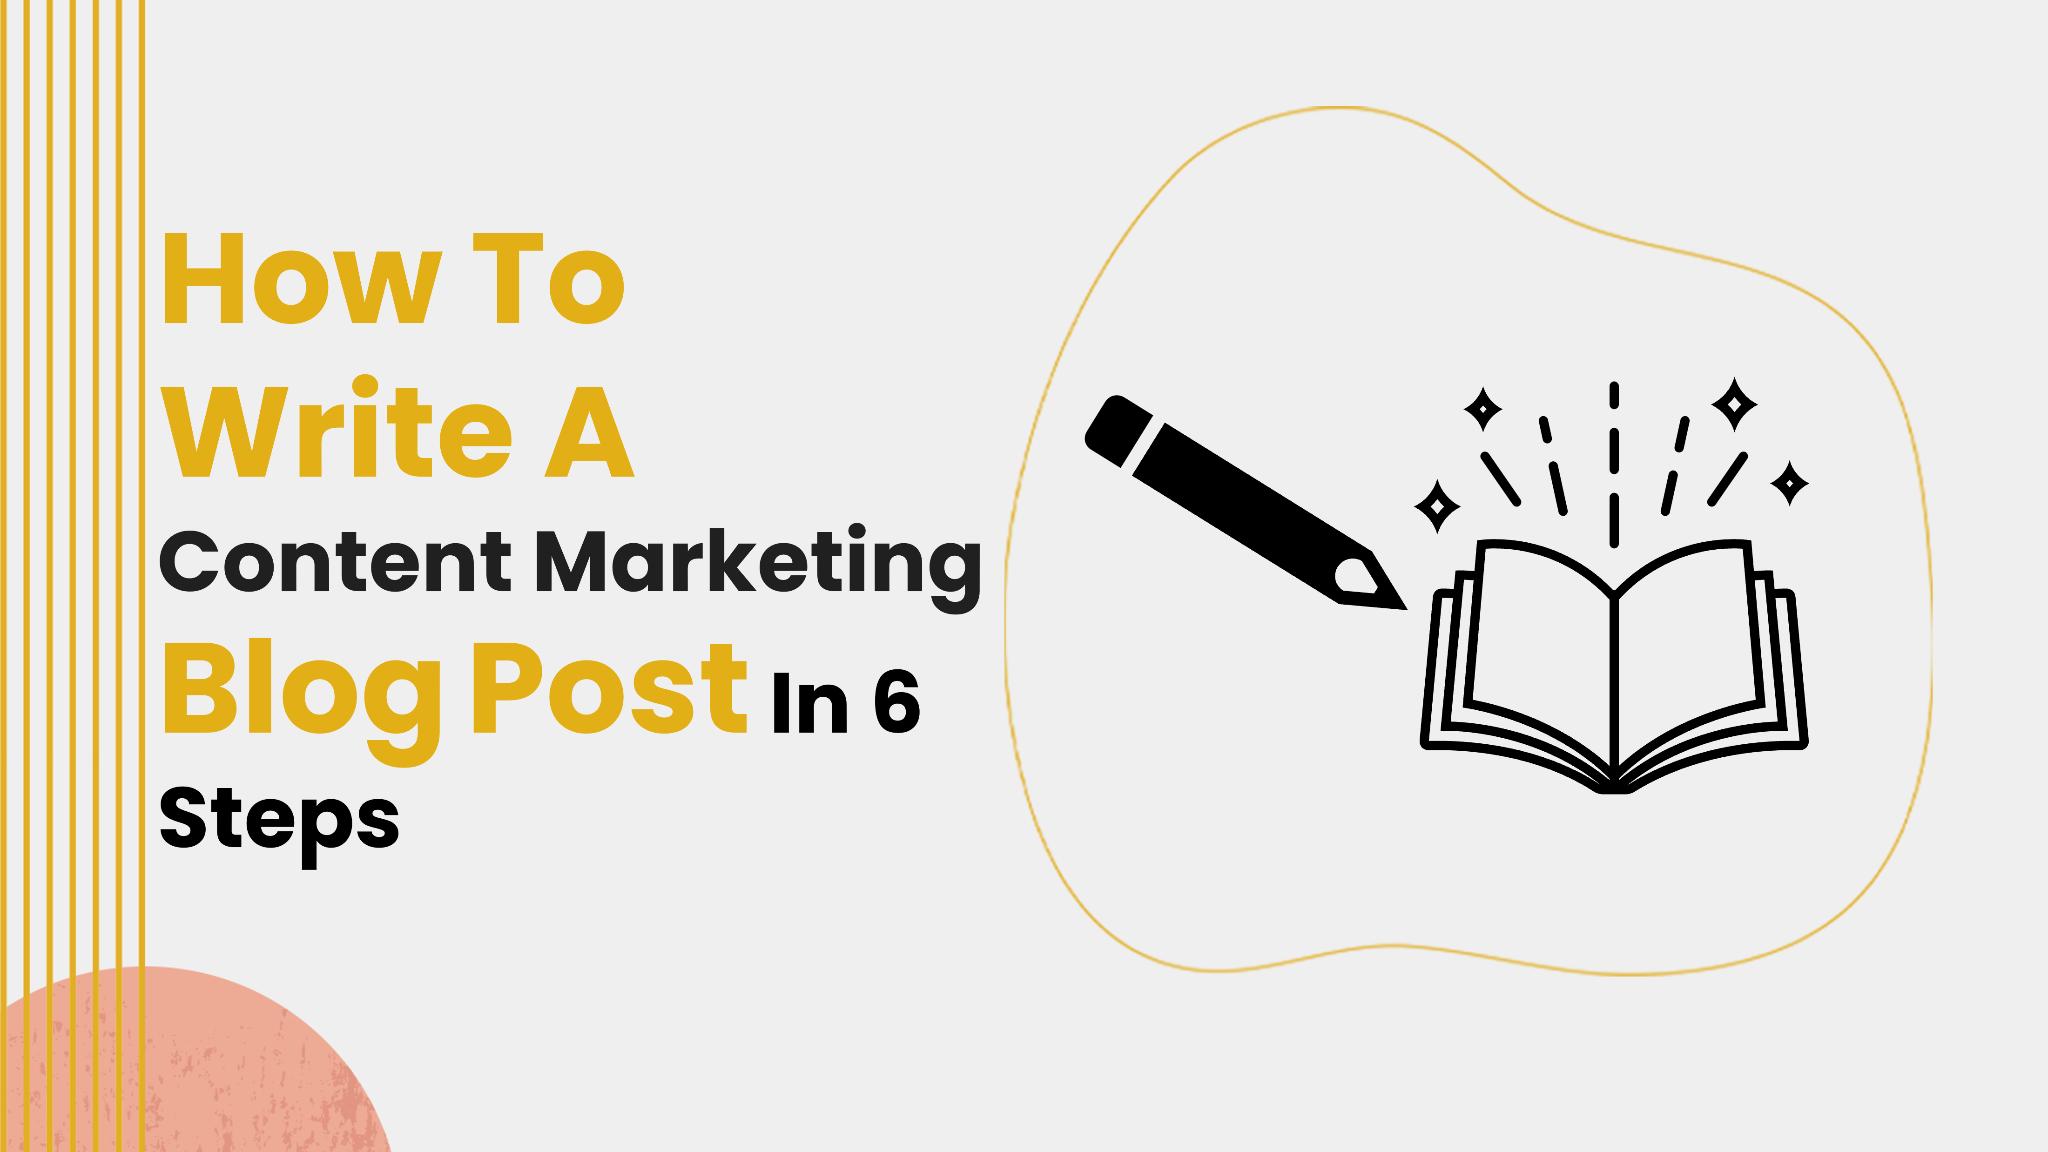 How To Write A Content Marketing Blog Post In 6 Steps - AGS